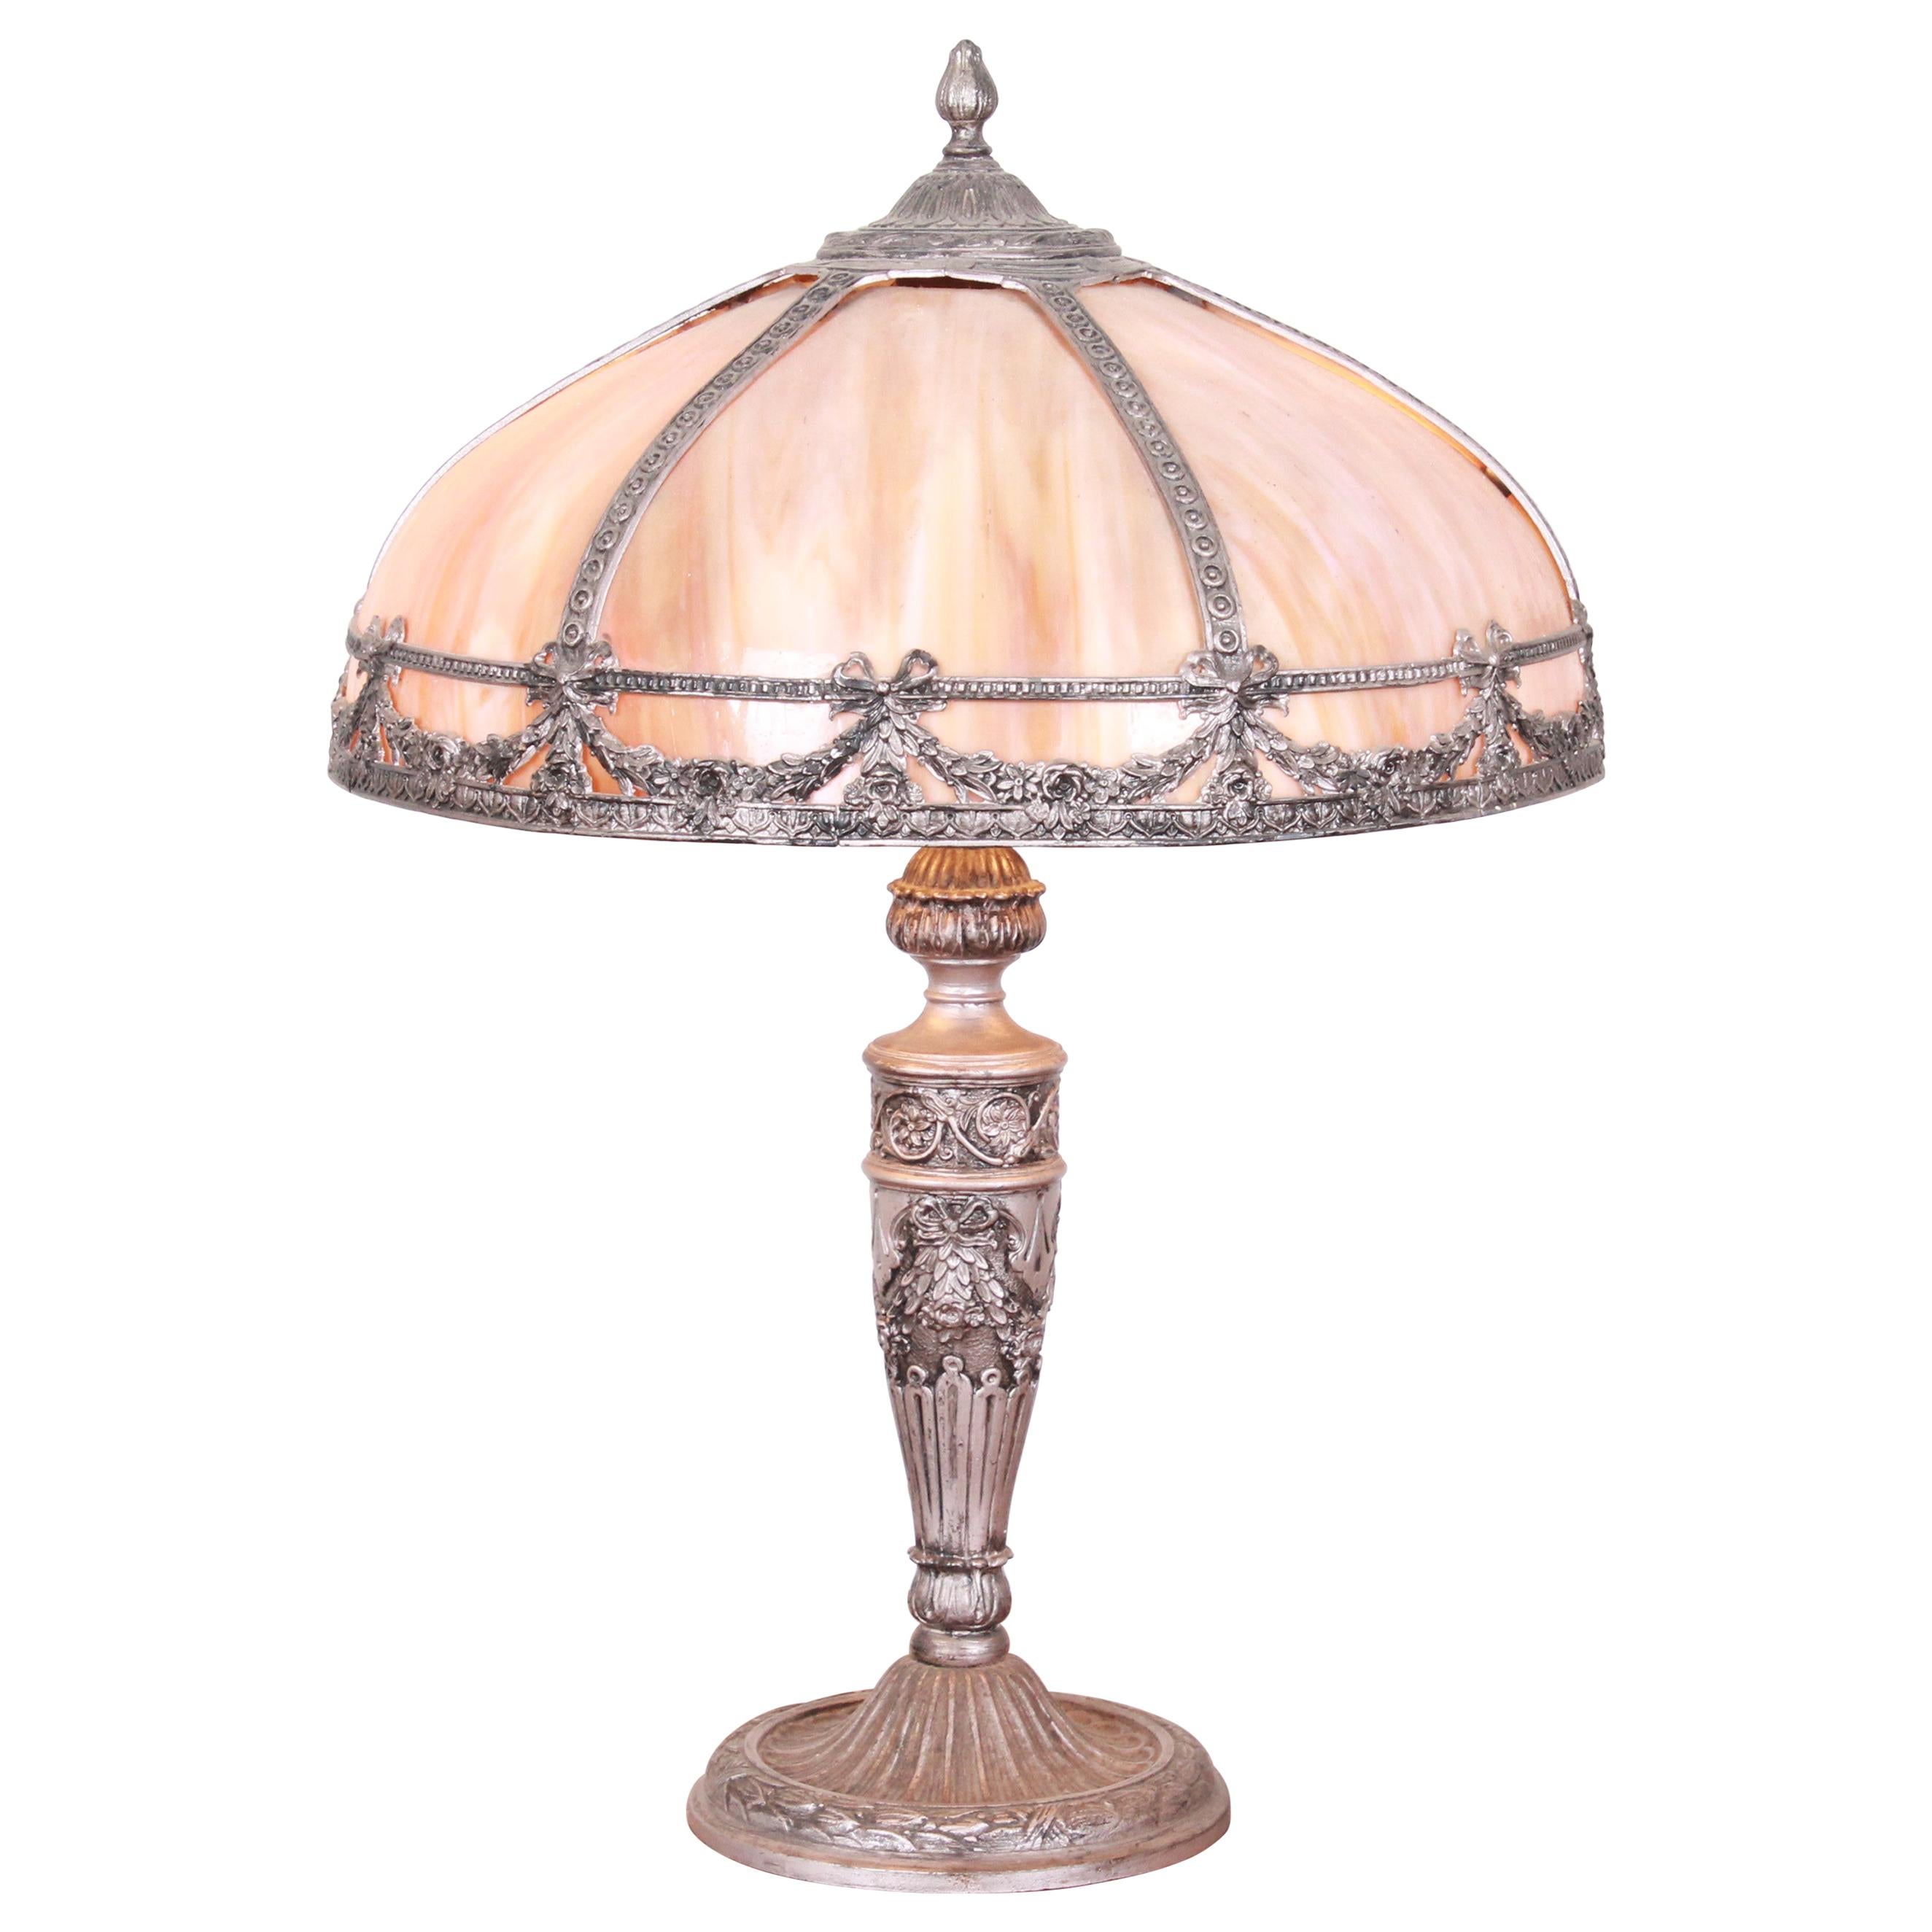 Antique Art Nouveau Slag Glass Table Lamp Attributed to Bradley & Hubbard, 1920s